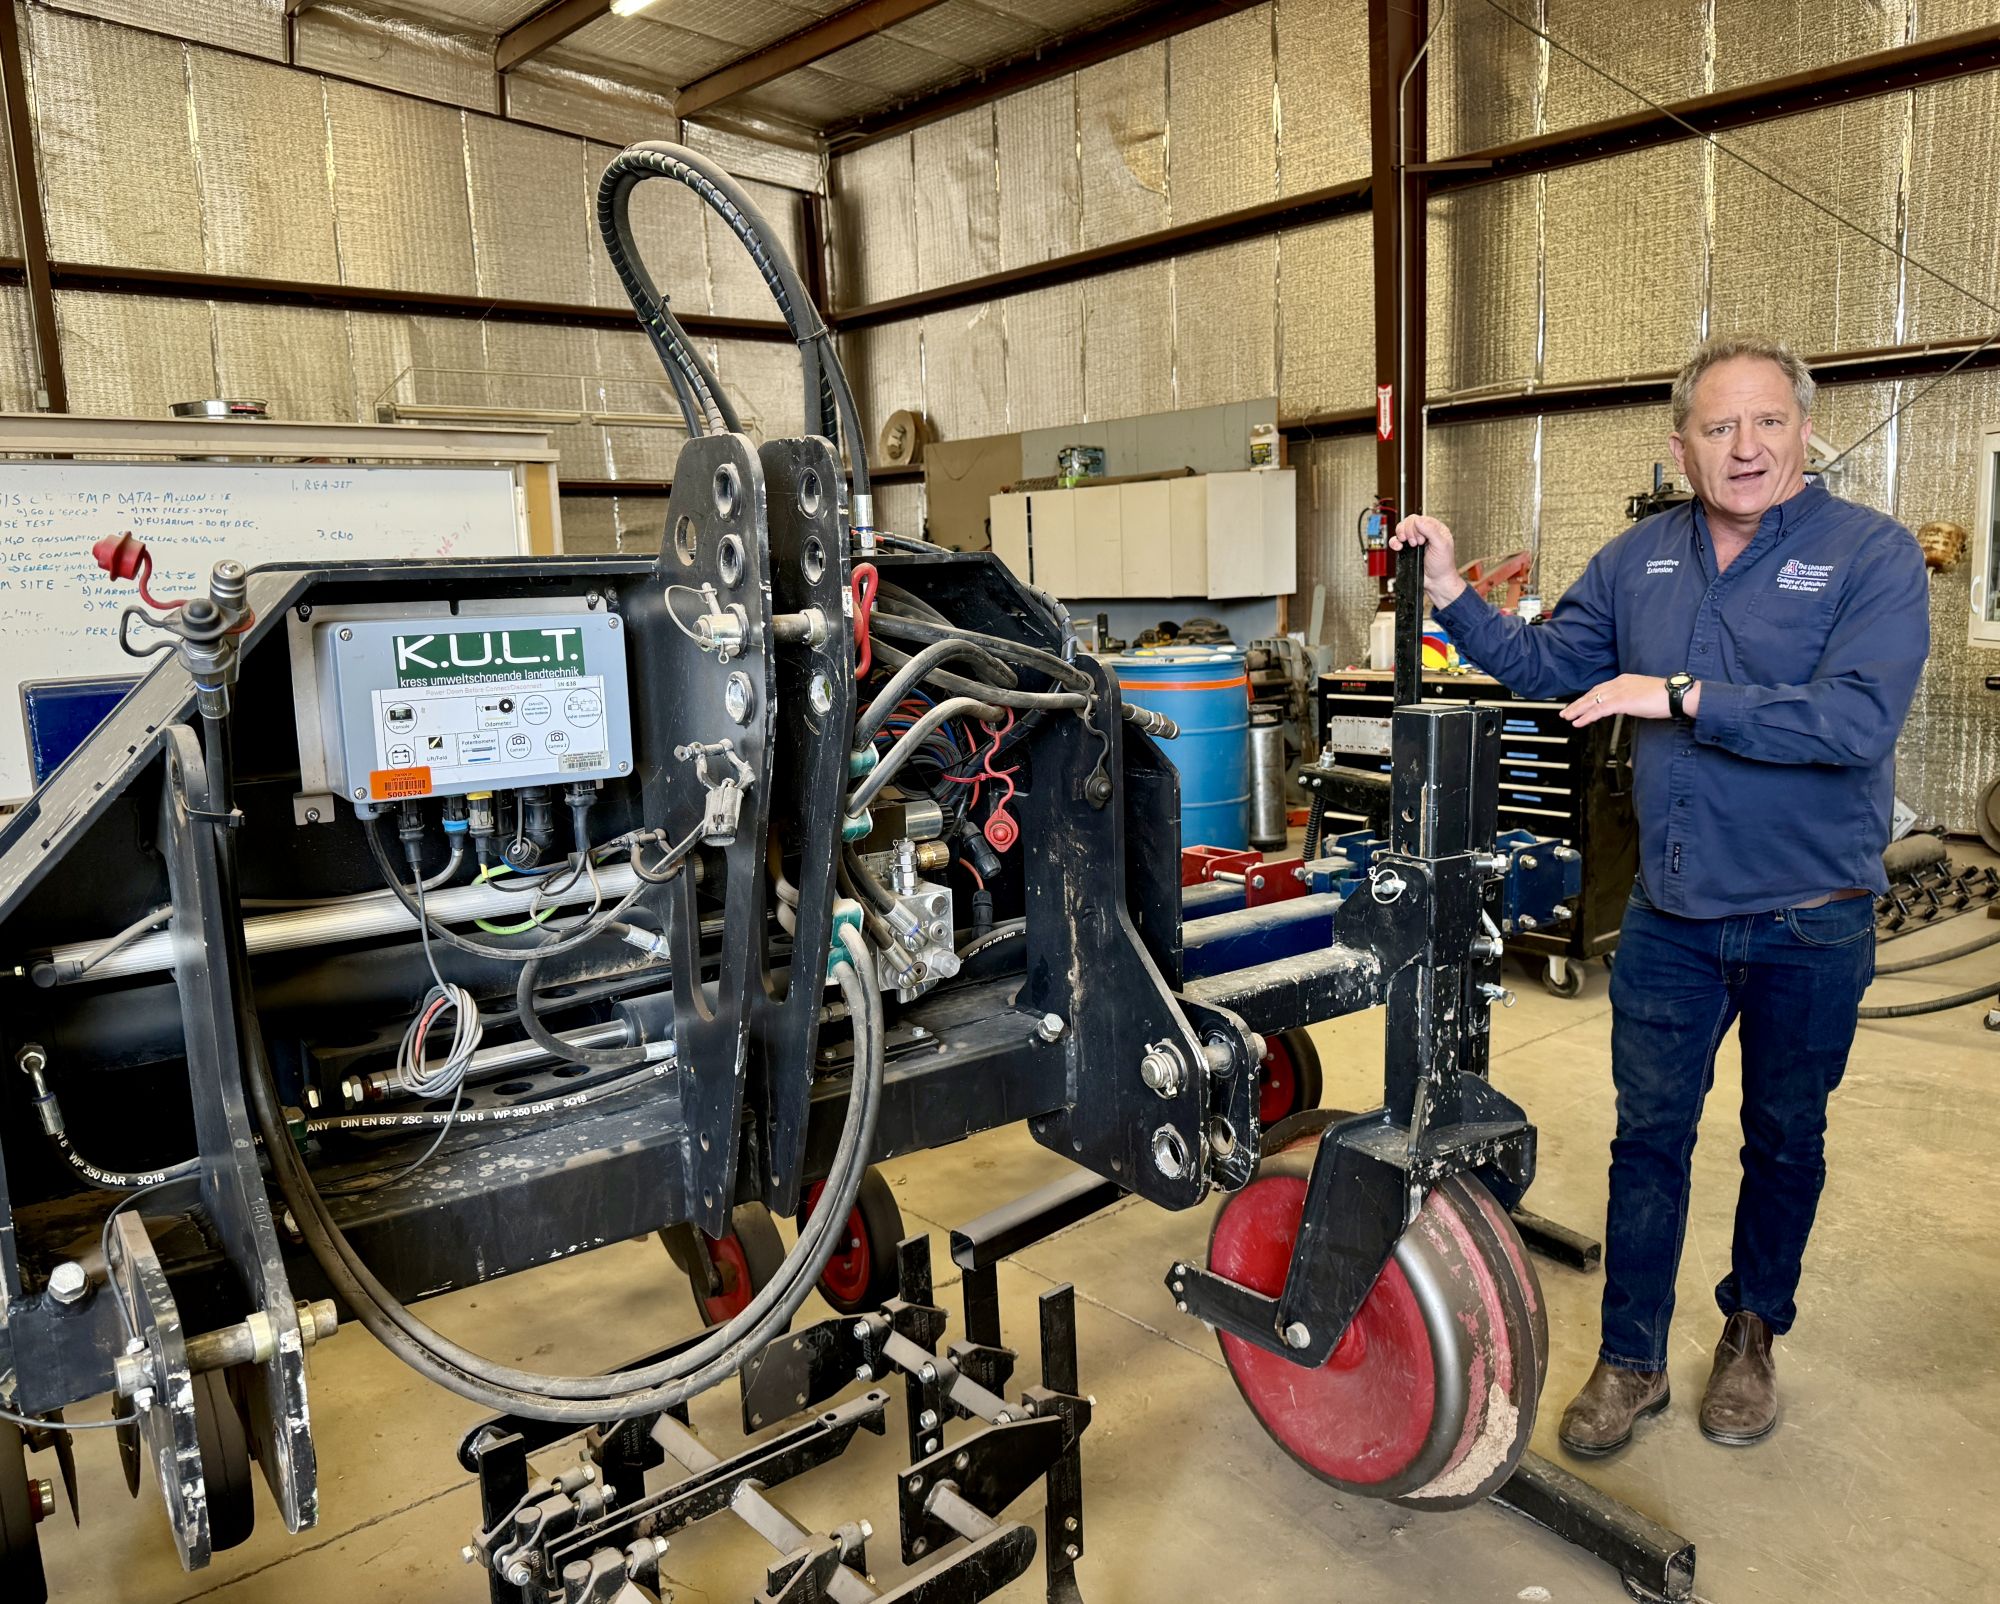 Mark Siemens, associate professor of biosystems engineering, stands beside technology he incorporates into his focus of precision and mechanized agriculture.